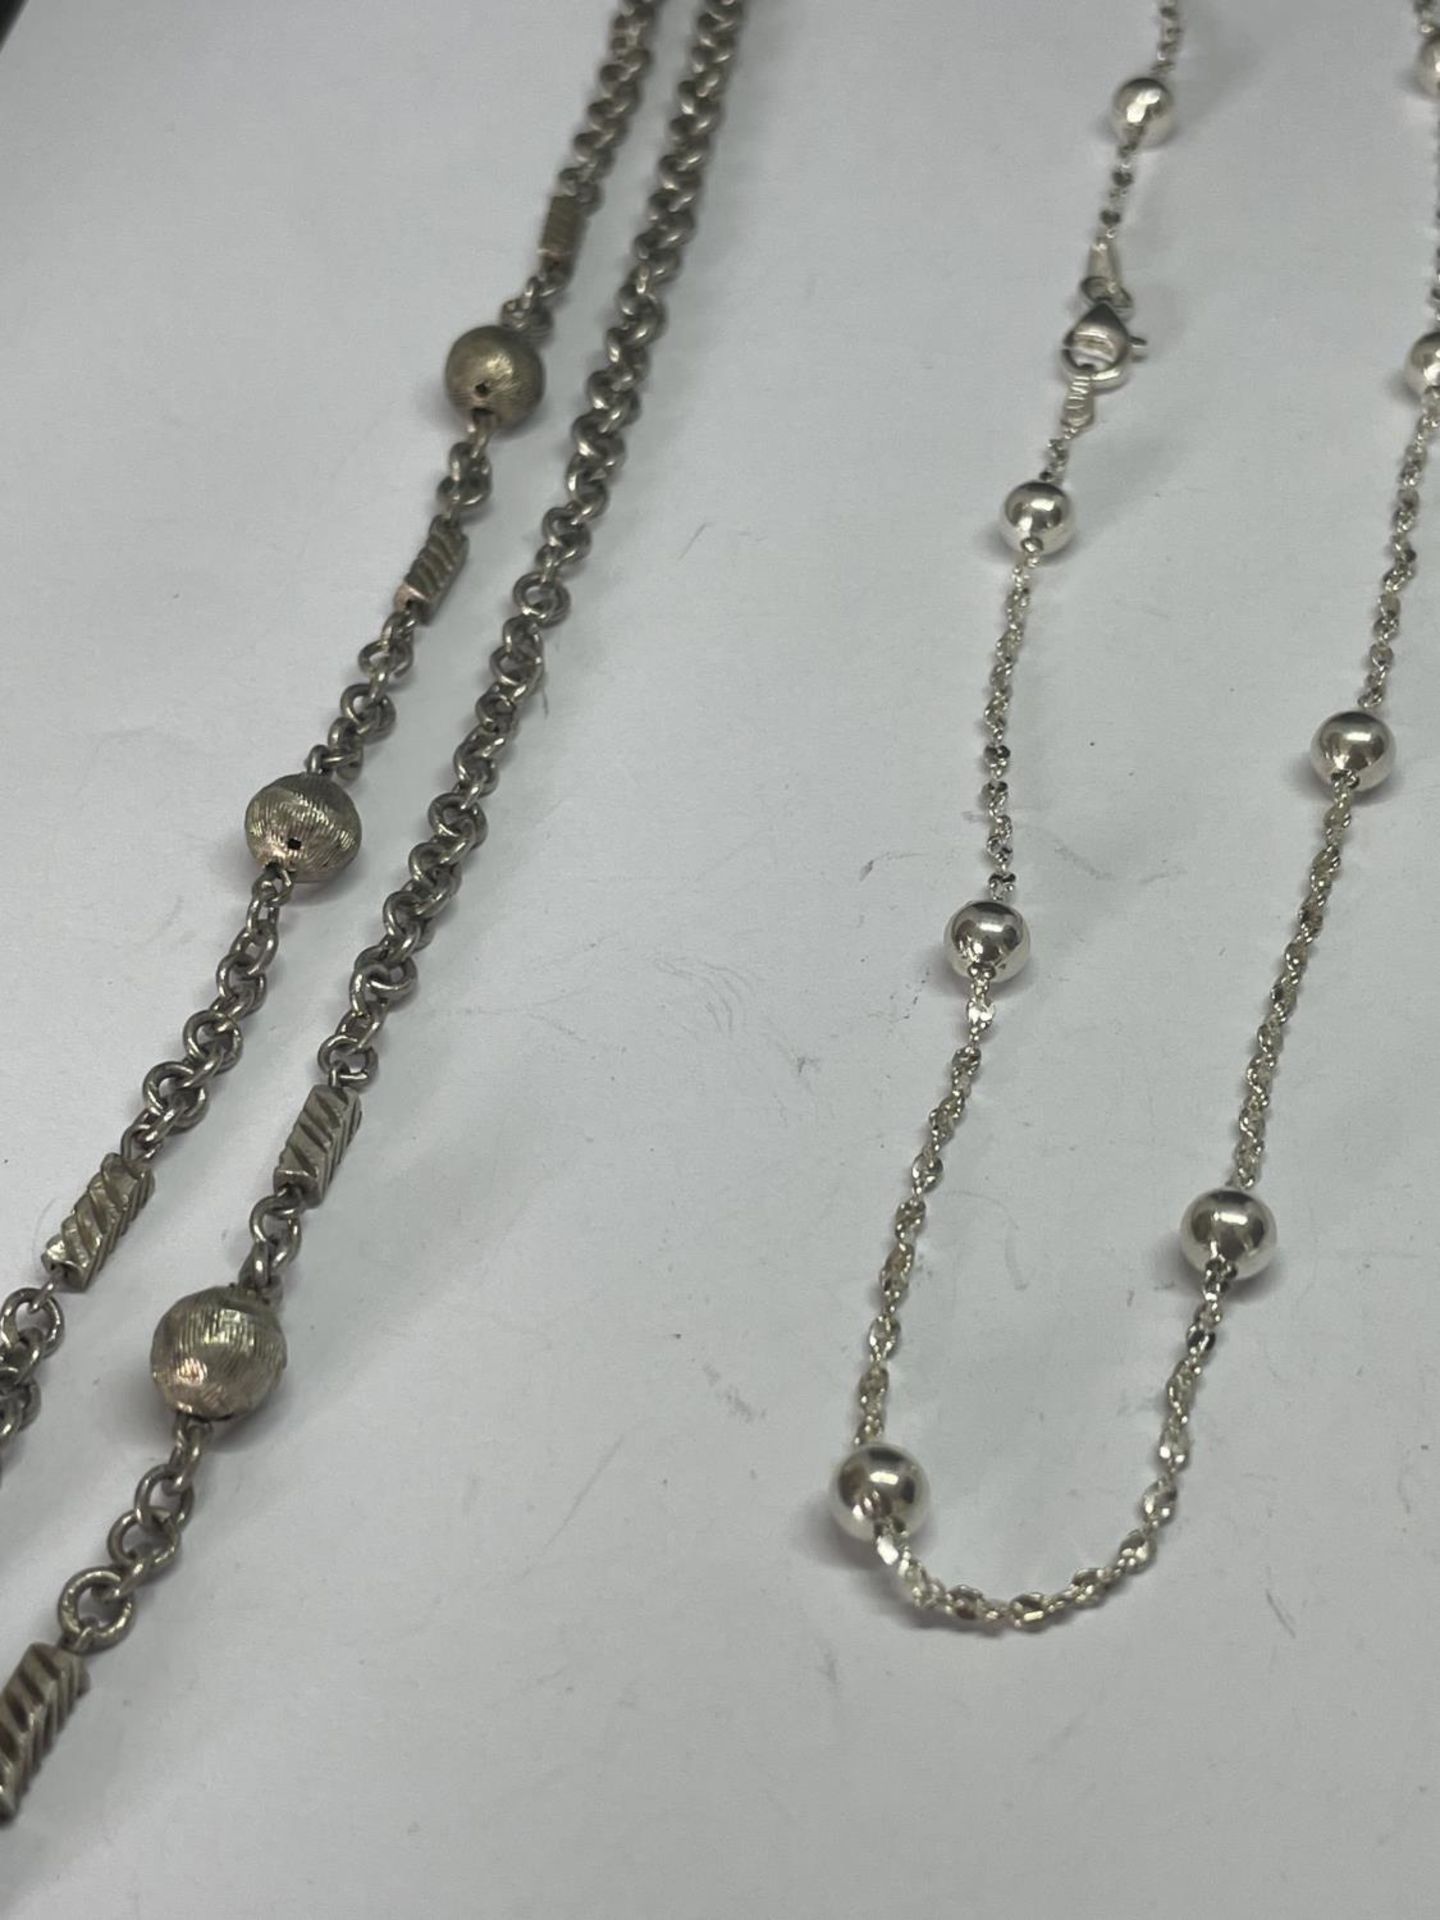 FOUR SILVER NECKLACES WITH BALL DESIGN - Image 5 of 5